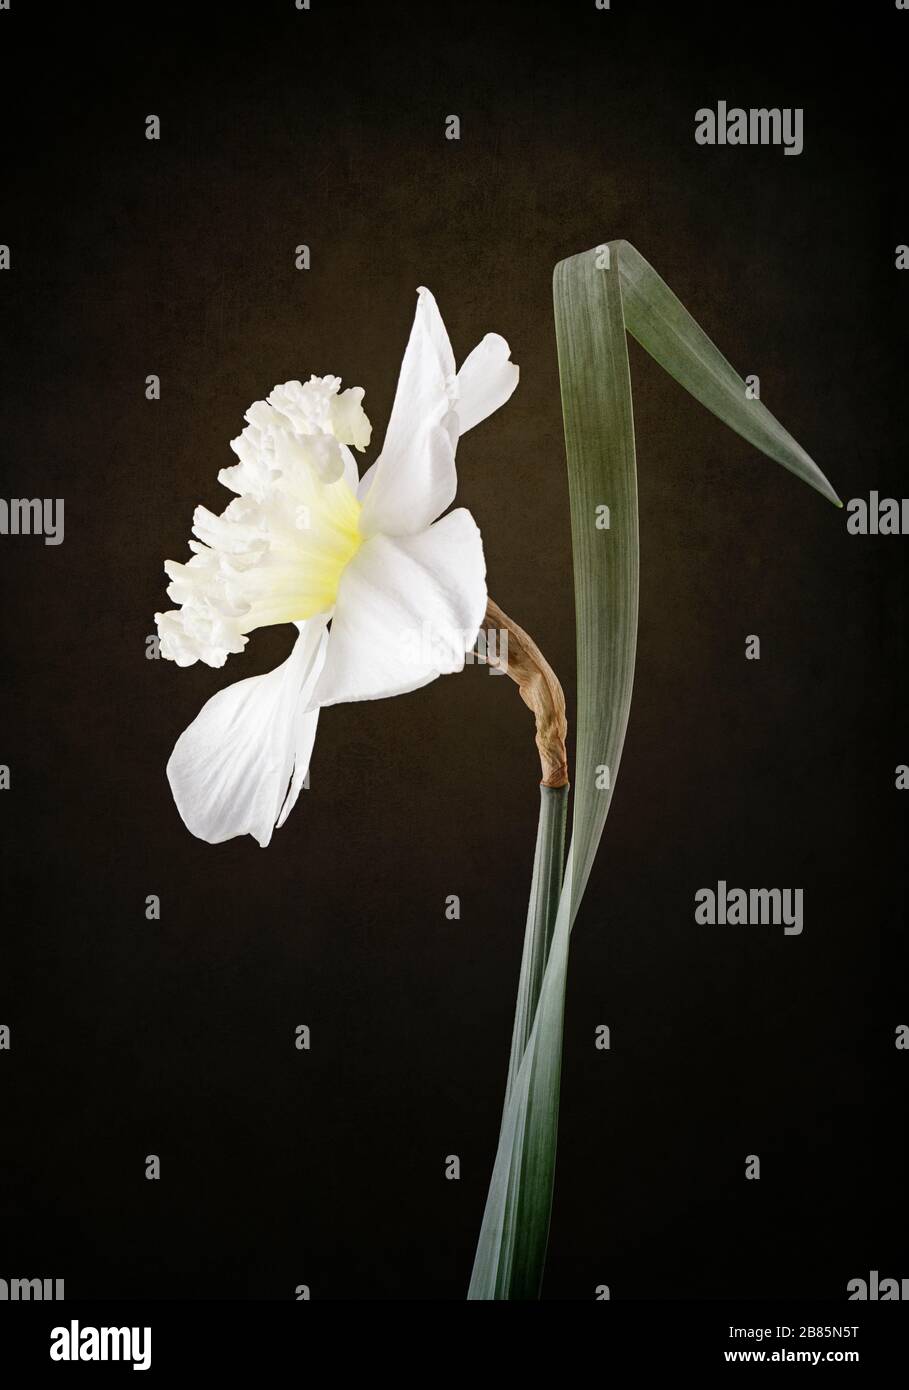 White daffodil on textured background Stock Photo